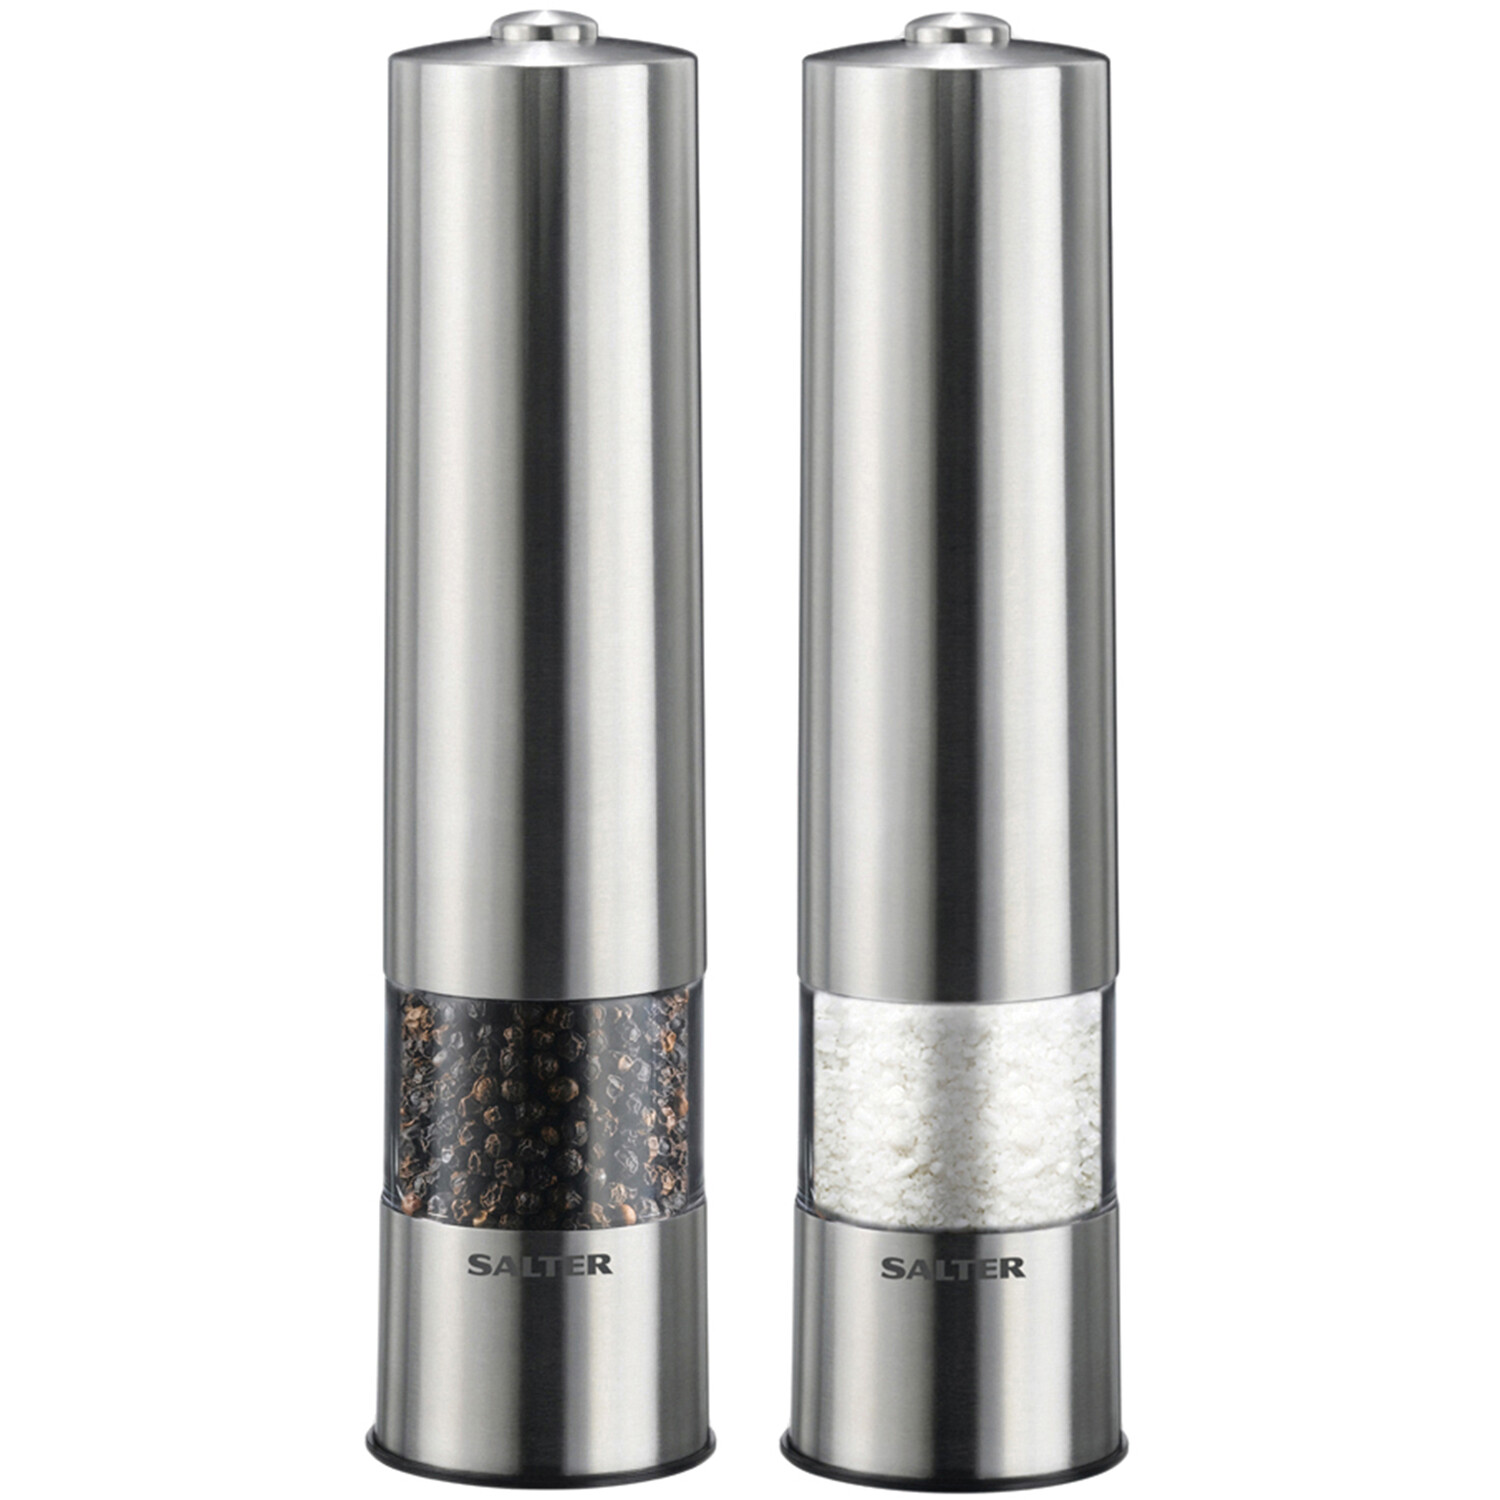 Salter Silver Electronic Salt and Pepper Mill Set Image 1